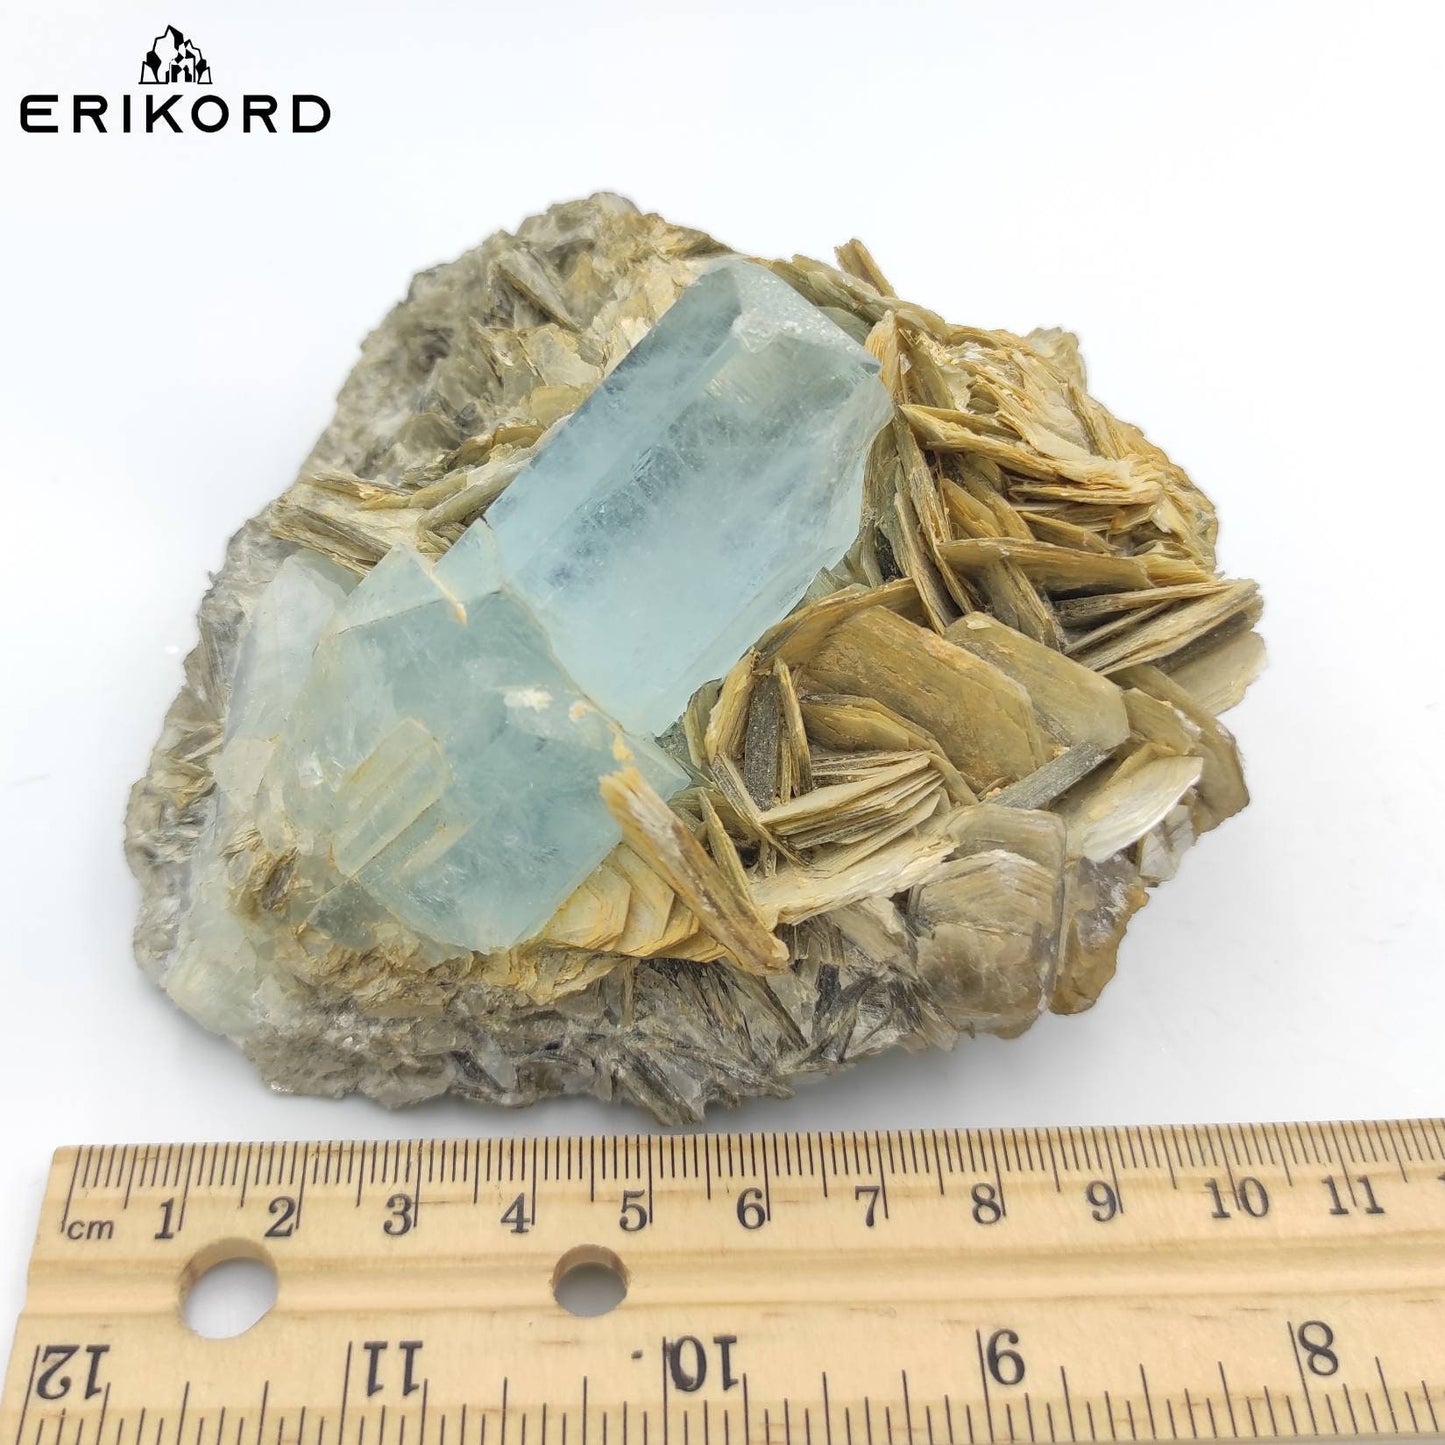 698g / 1.5 lbs Aquamarine Crystal Cluster with Muscovite Specimen from Shigar Pakistan Natural Raw Mineral Collectors Specimen Large Crystal